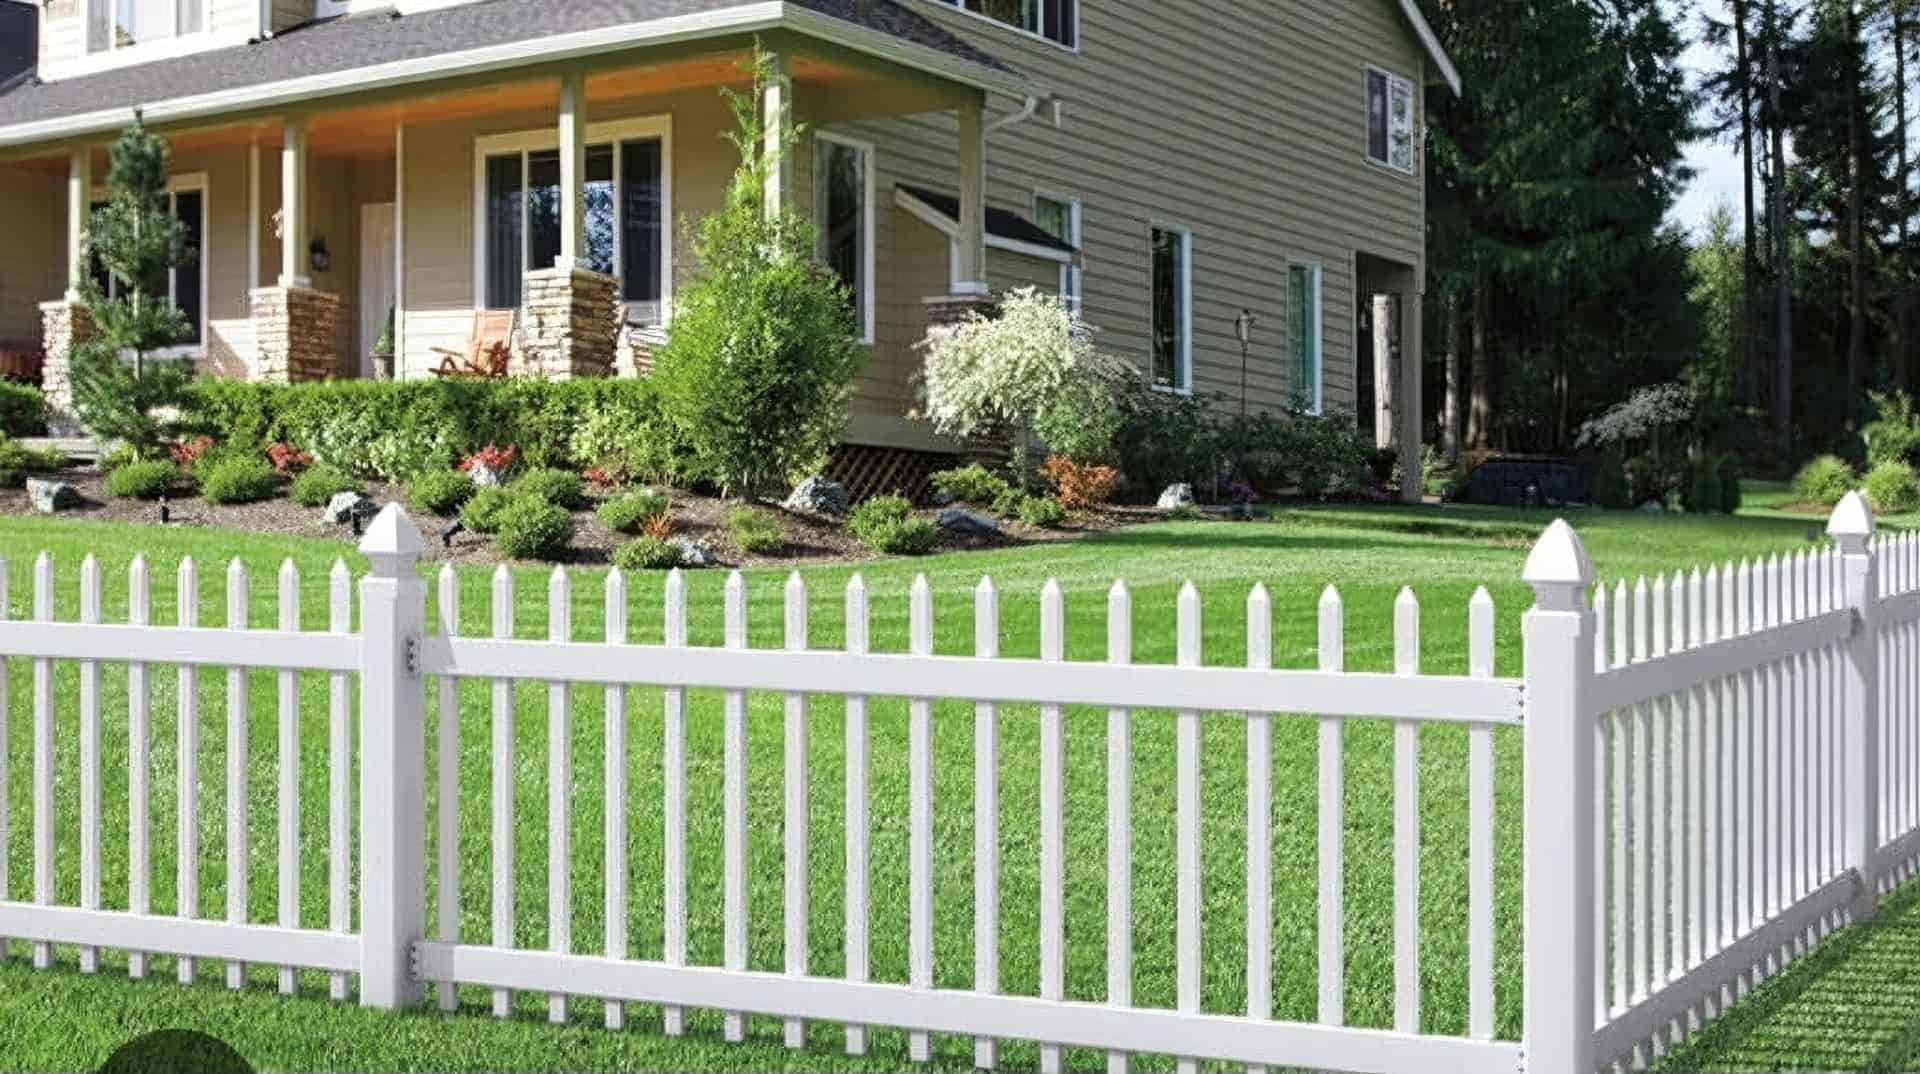 White Vinyl Vertical Picket Fence surrounding a house boundary with lush green grass and plants in the front yard.